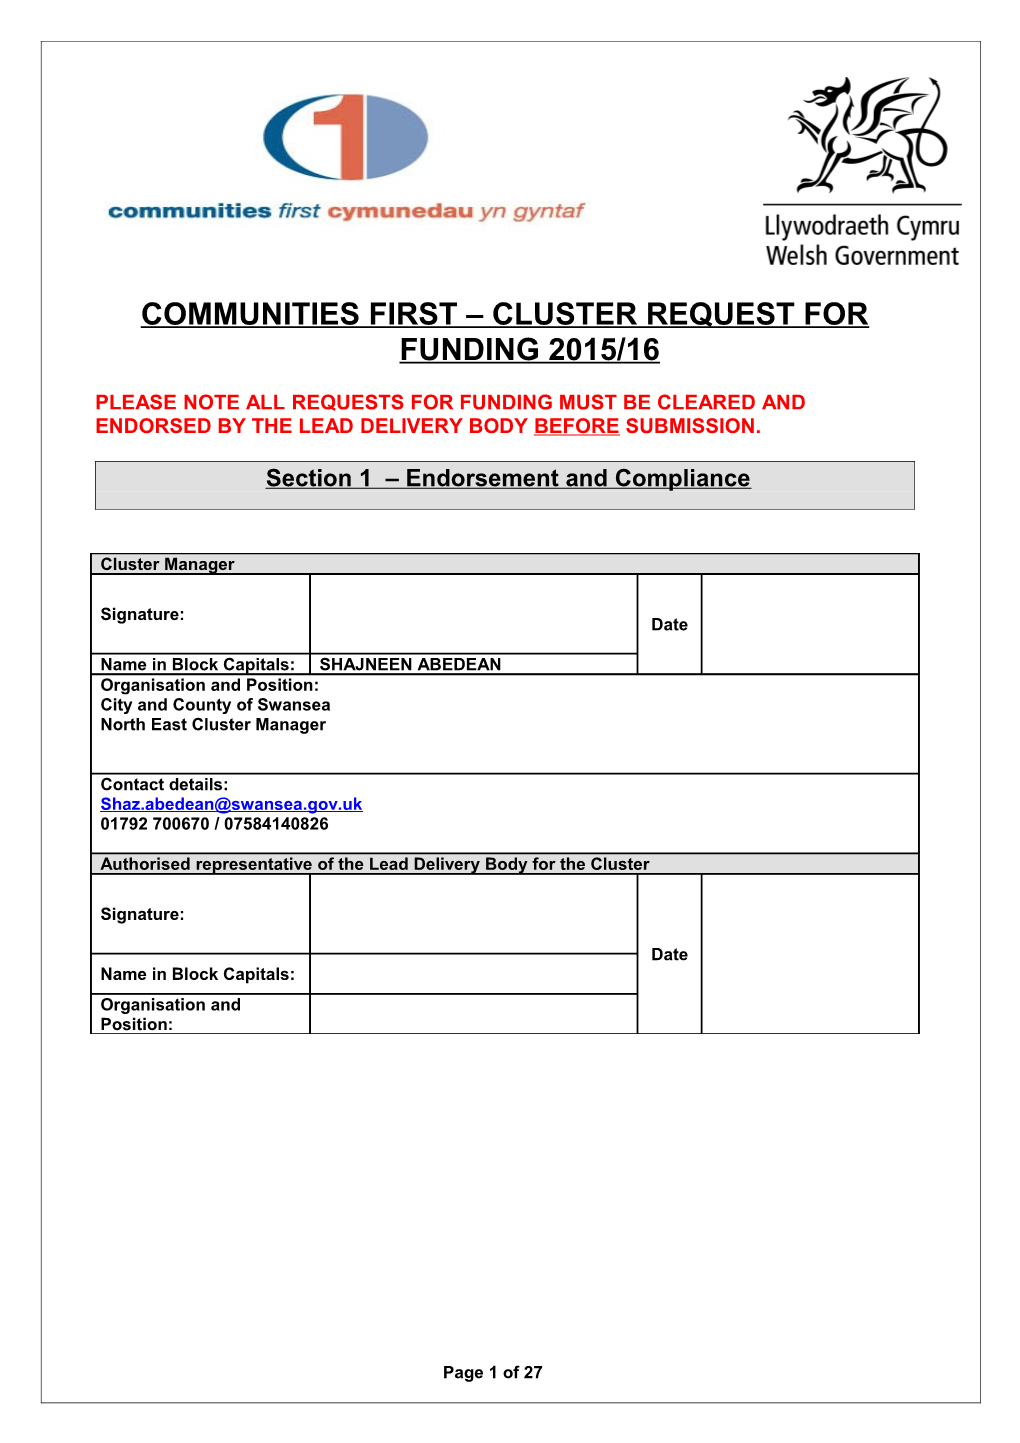 Communities First Cluster Request for Funding 2015/16